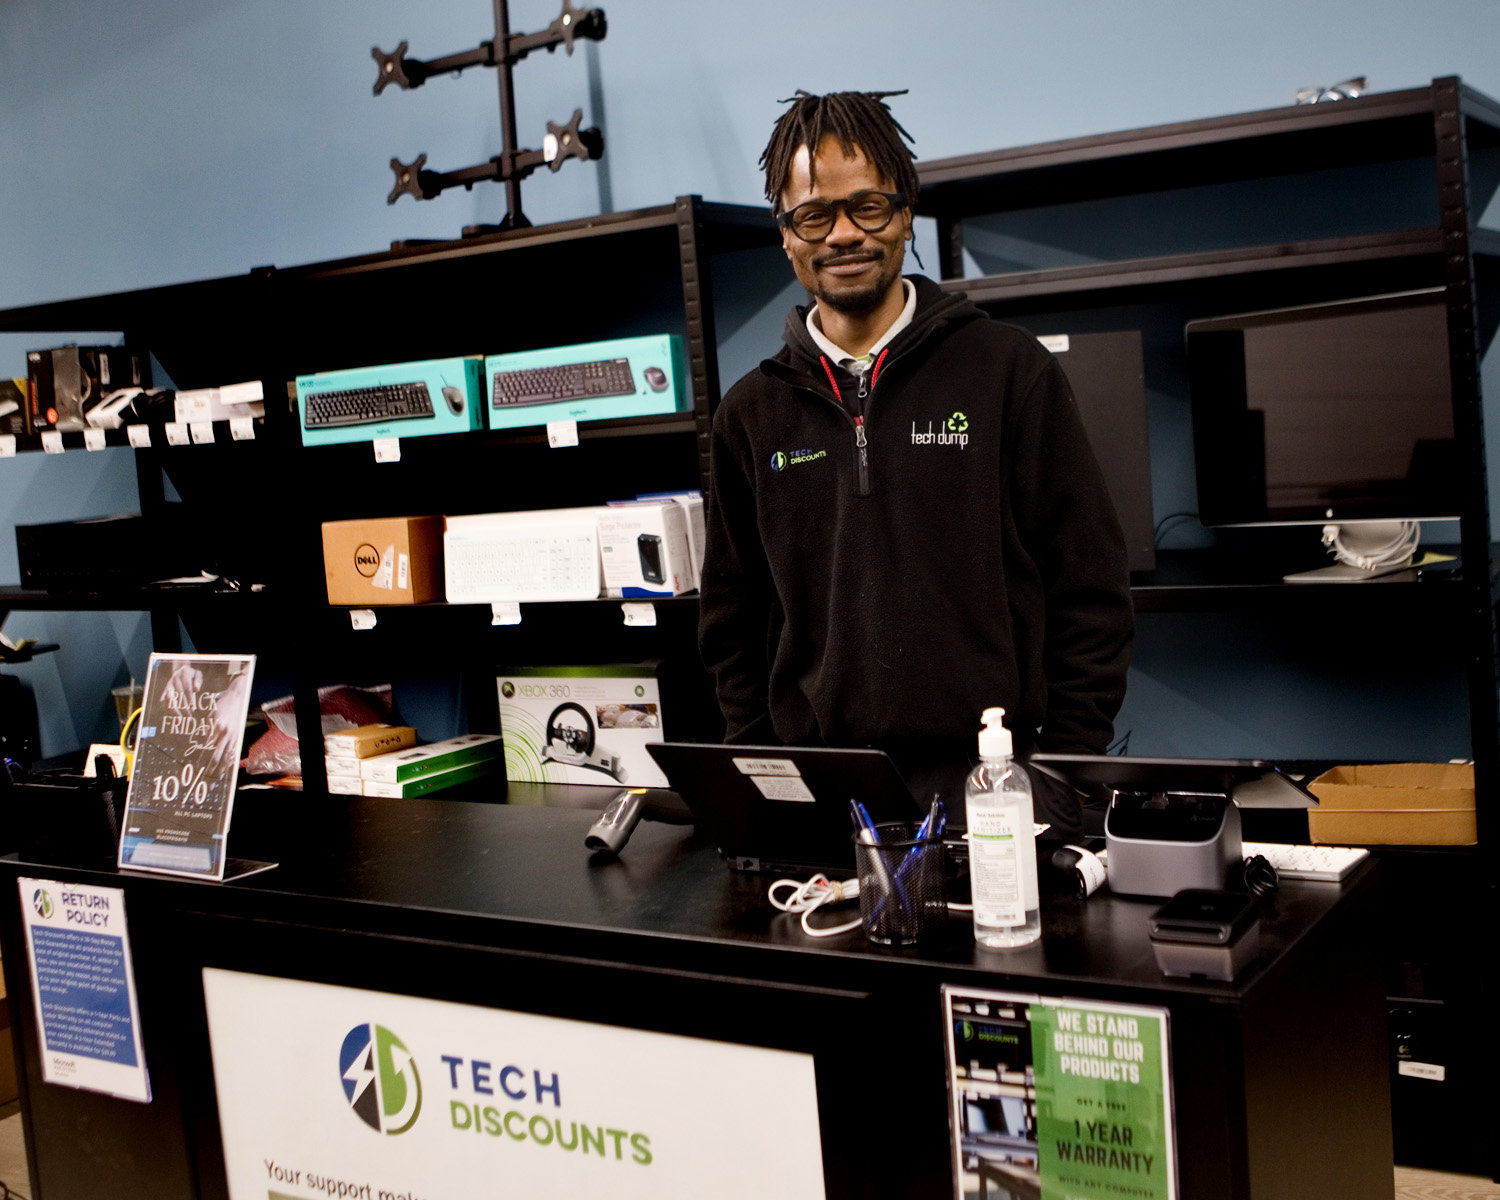 Both retail stores carry three main brands of computers: Dell, Hewlett-Packard, and Lenovo. Large quantities of computers are sold to schools and non-profits, but community members are welcome to shop, too. Wil James is the store manager of the St. Paul store. (Photo by Margie O’Loughlin)